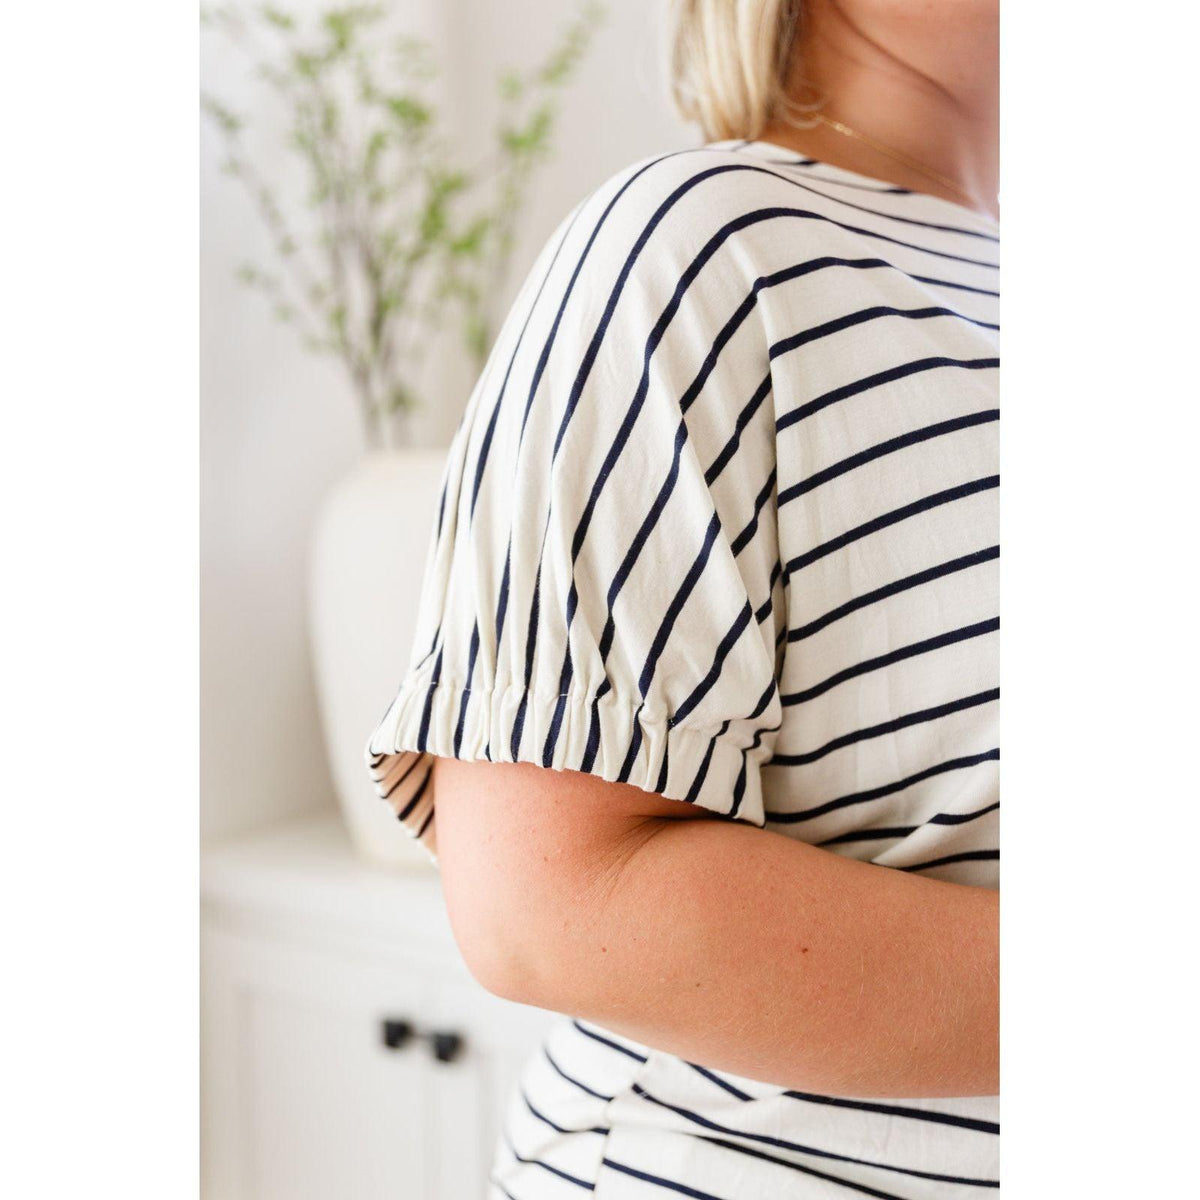 Much Ado About Nothing Striped Top - becauseofadi